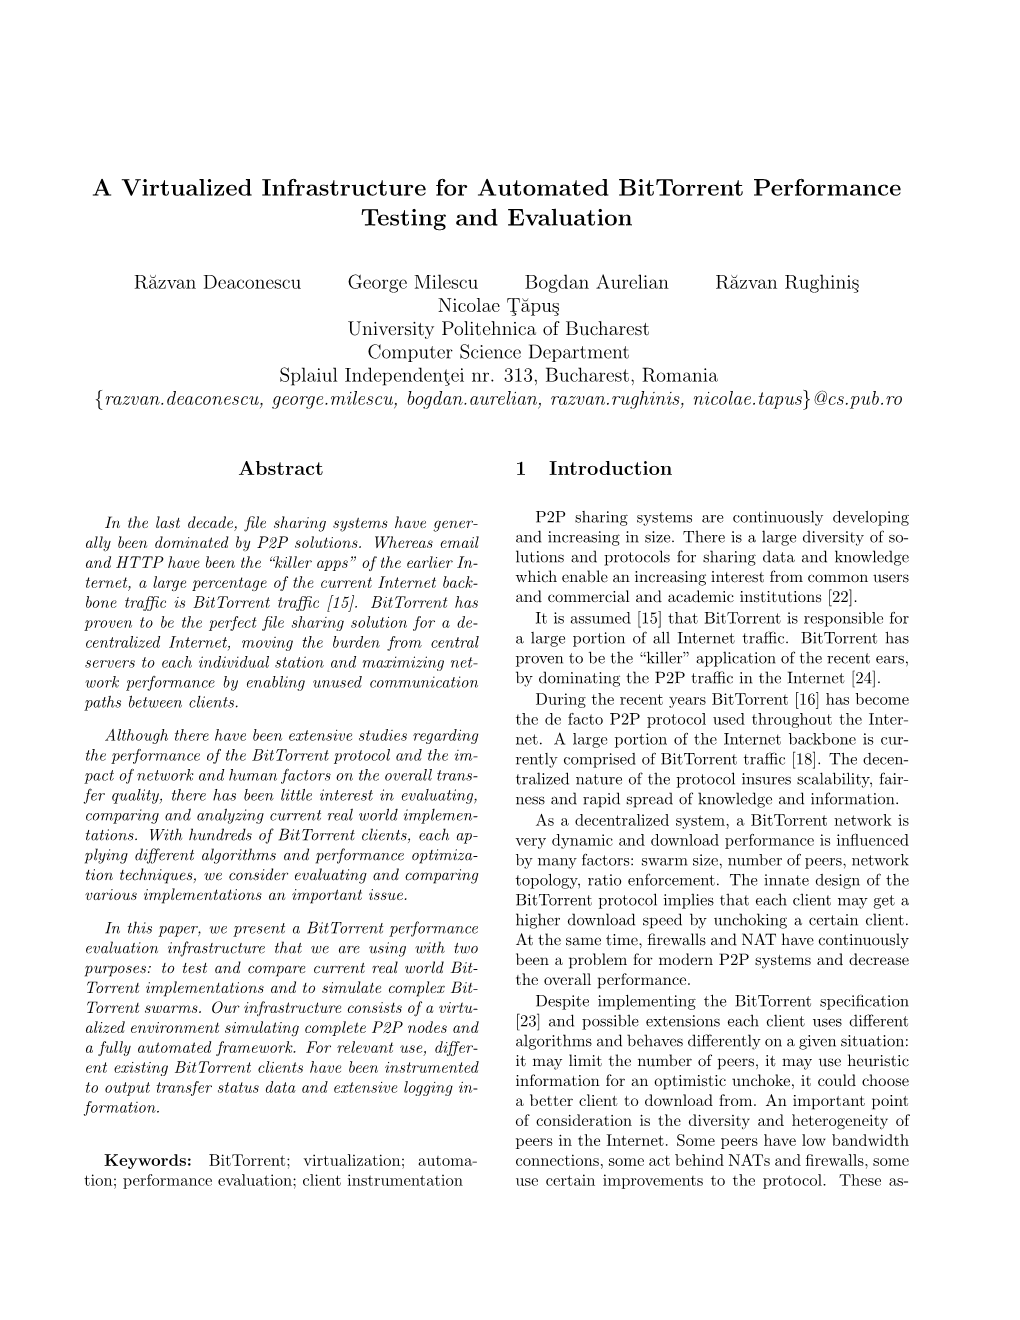 A Virtualized Infrastructure for Automated Bittorrent Performance Testing and Evaluation